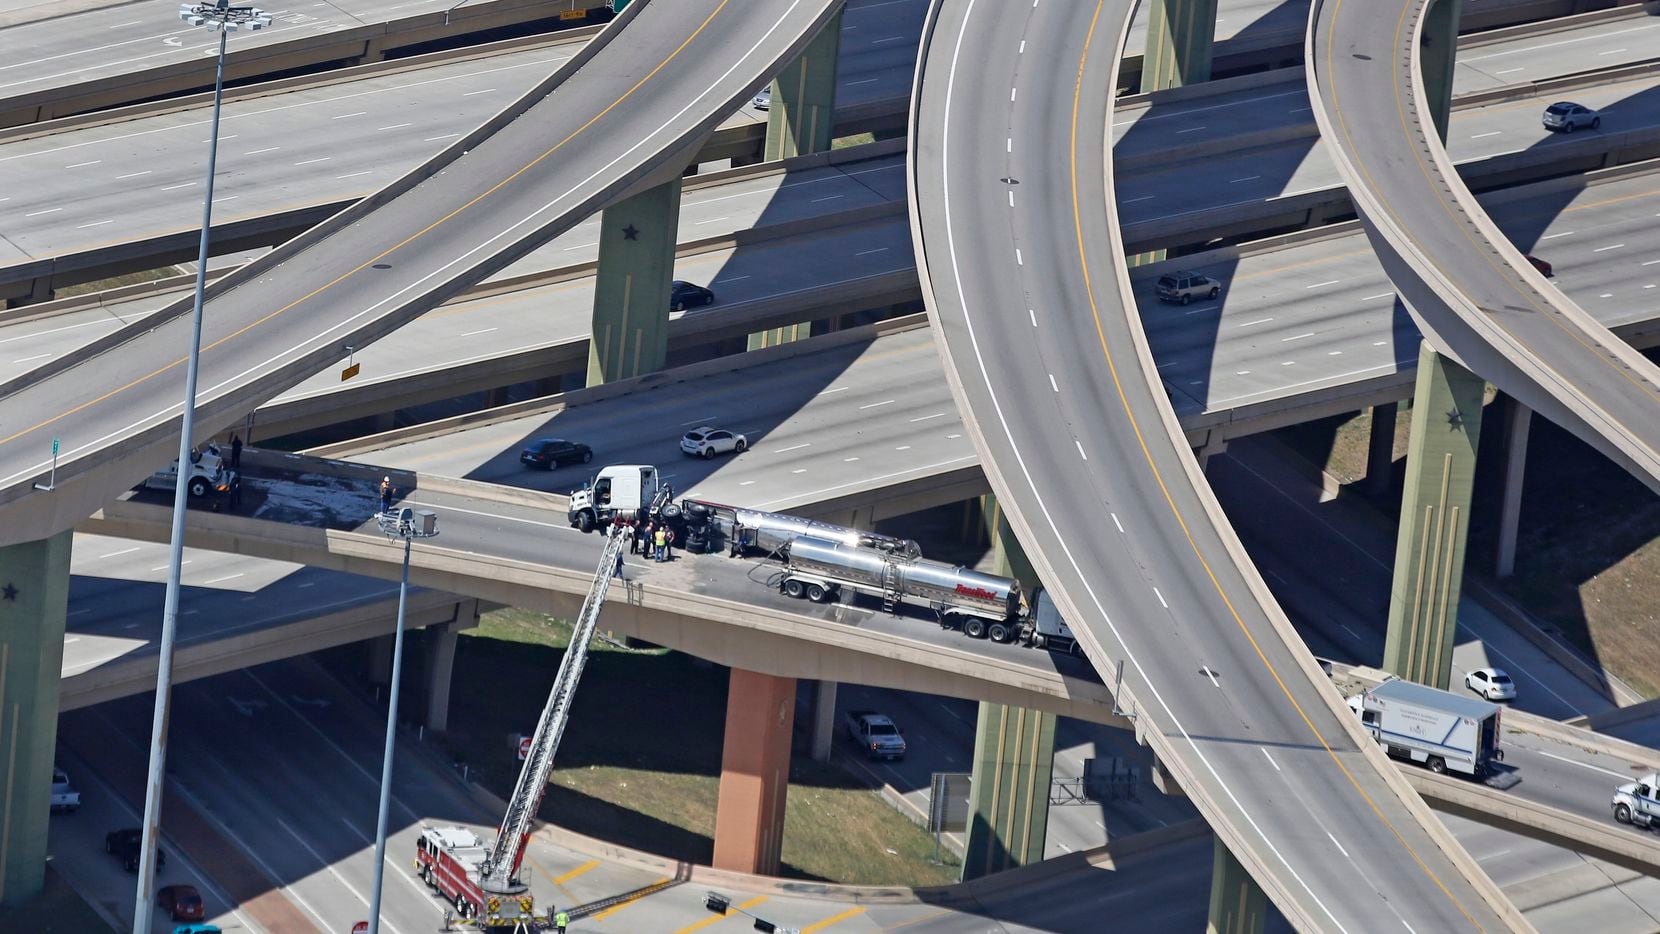 The Intersection of Interstate 635 and Highway 75 north of downtown Dallas closed after an...